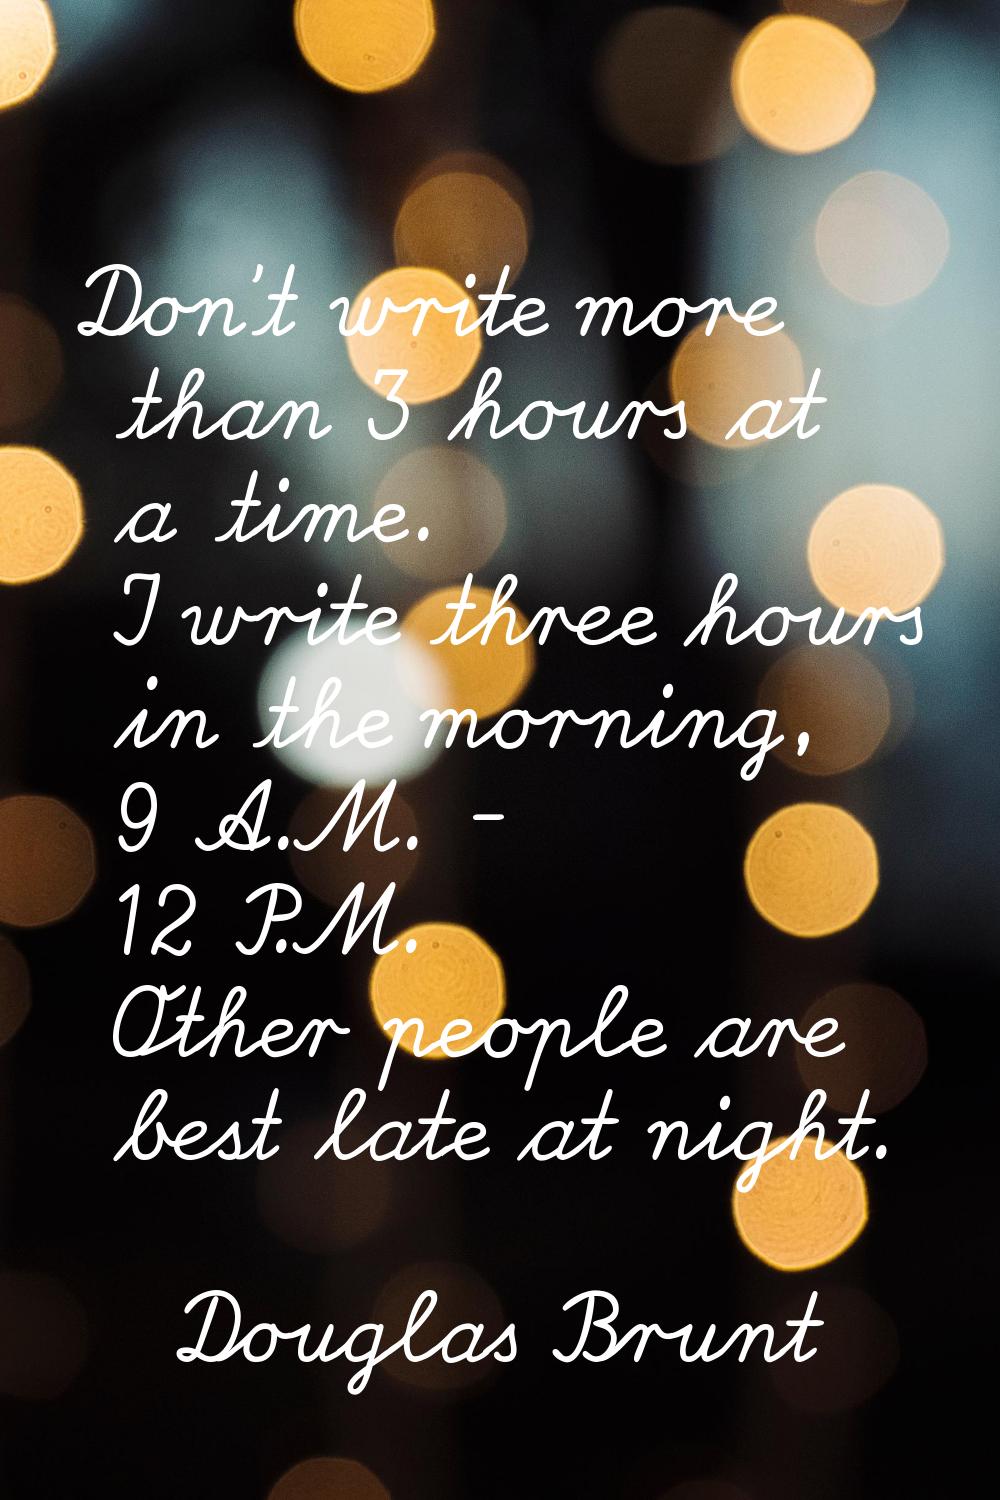 Don't write more than 3 hours at a time. I write three hours in the morning, 9 A.M. - 12 P.M. Other